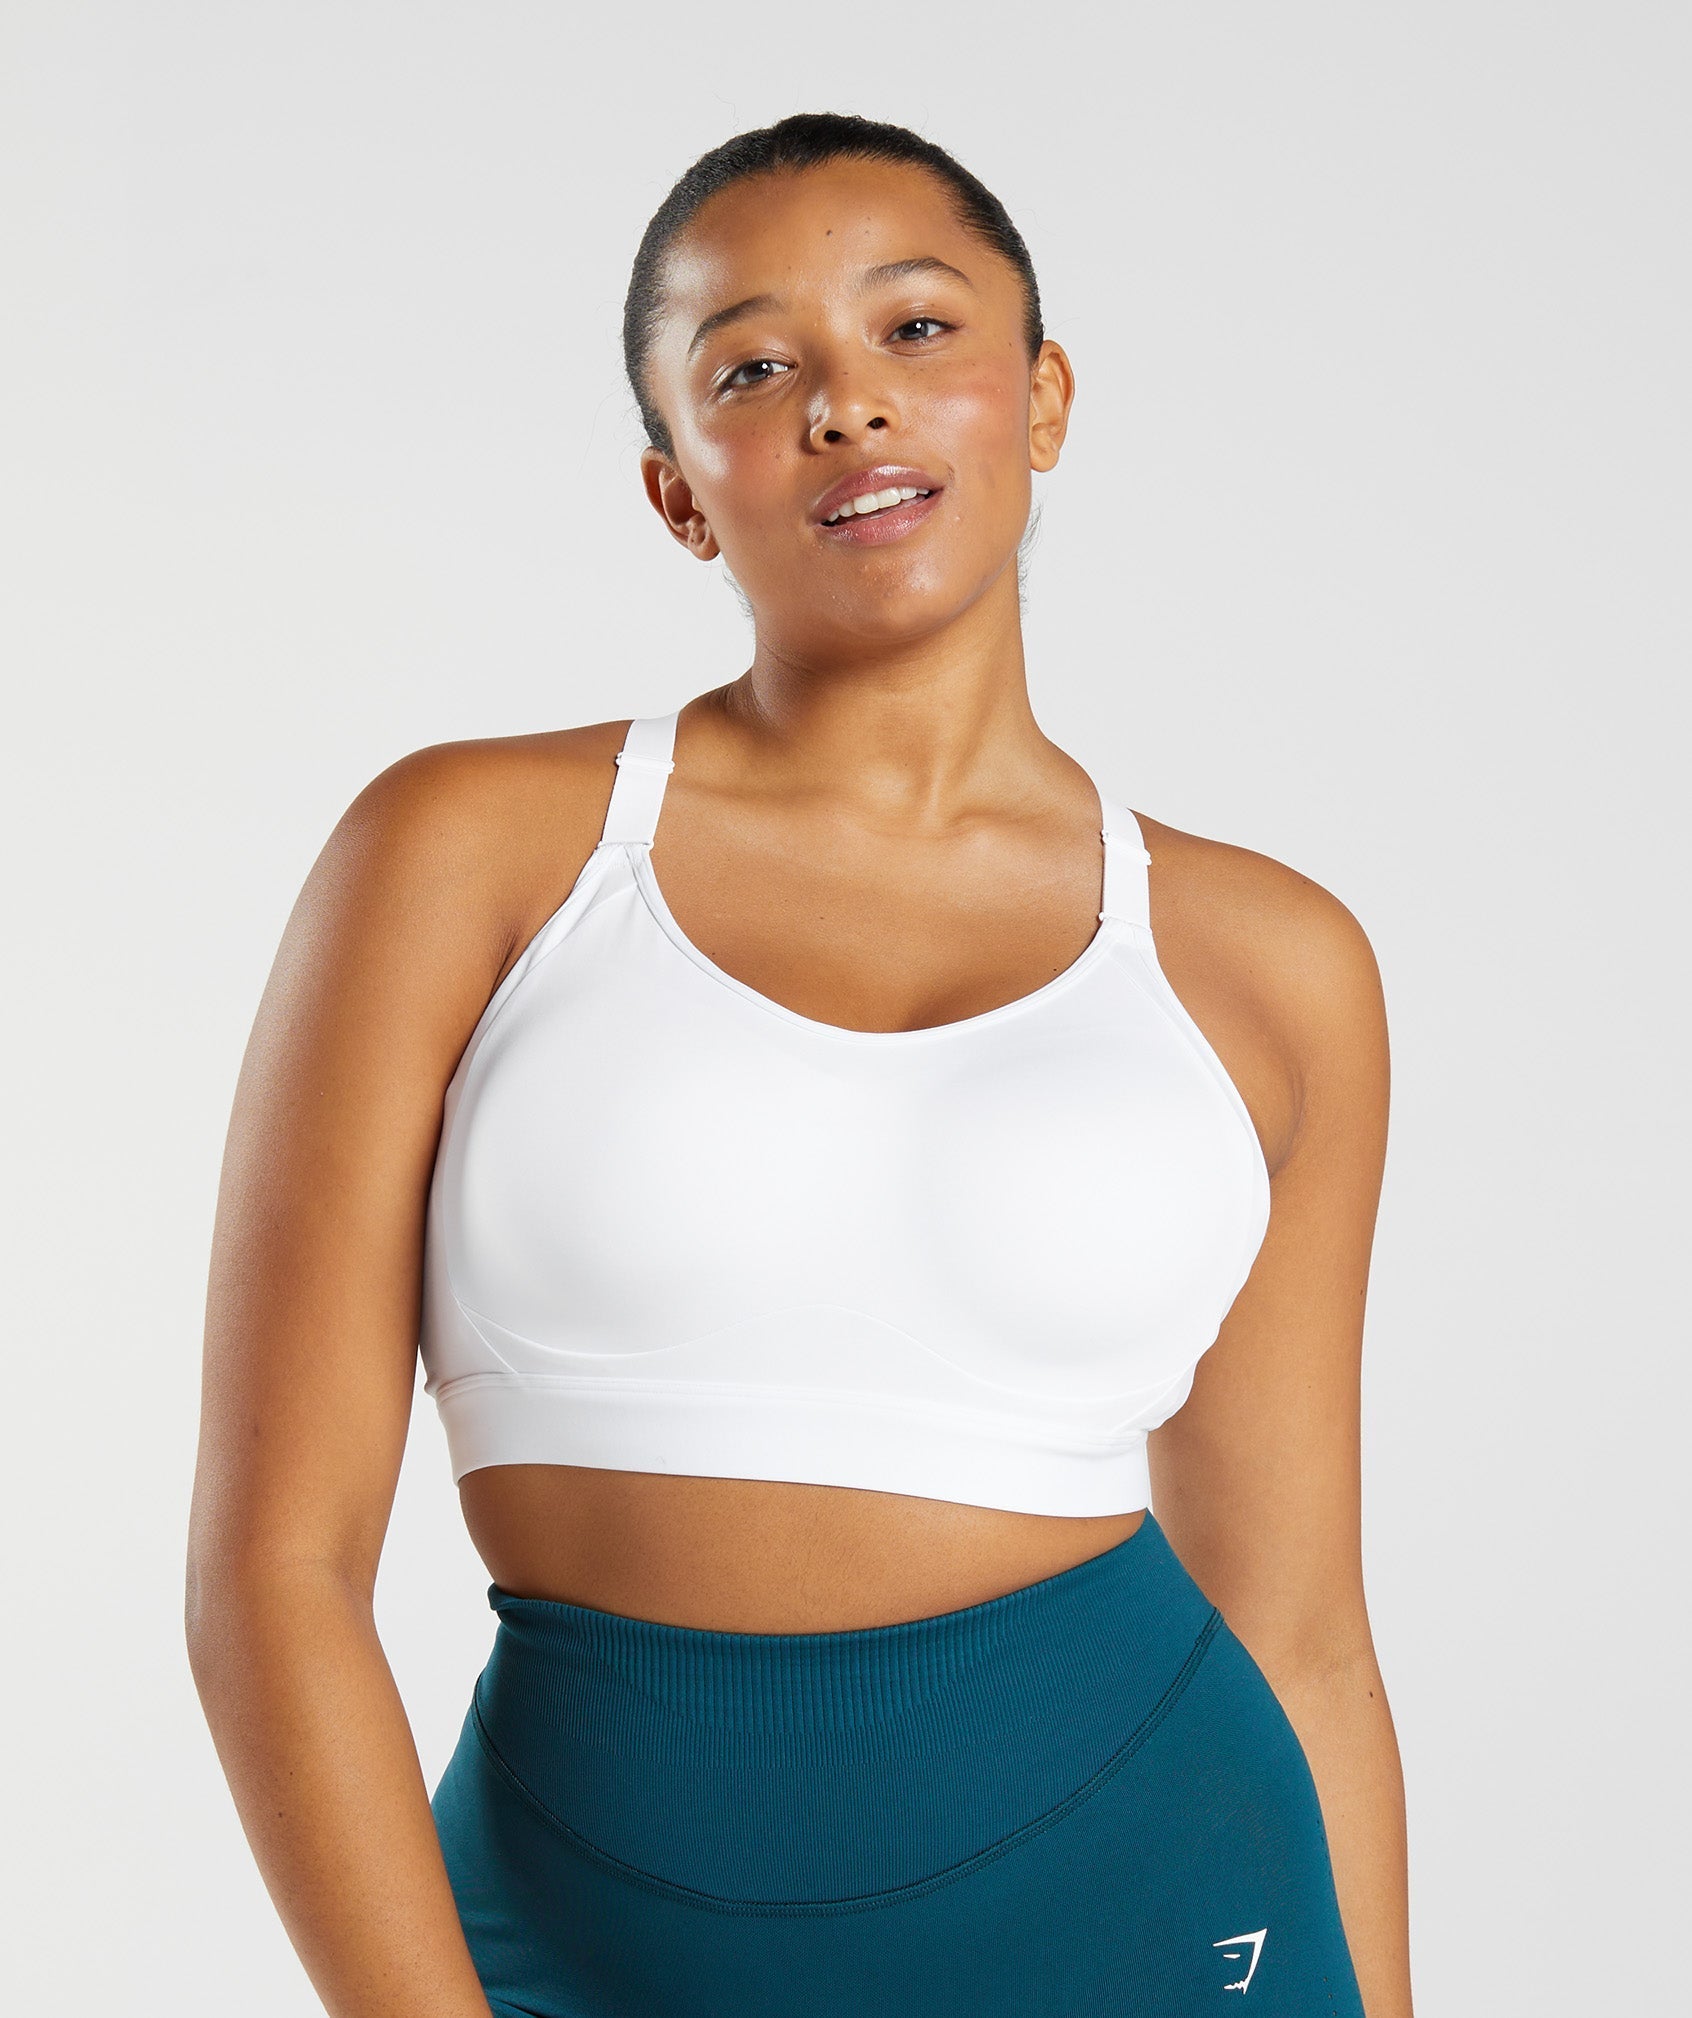 Women's High-coverage Sports Bras - 30% Flat off - Use code 2021